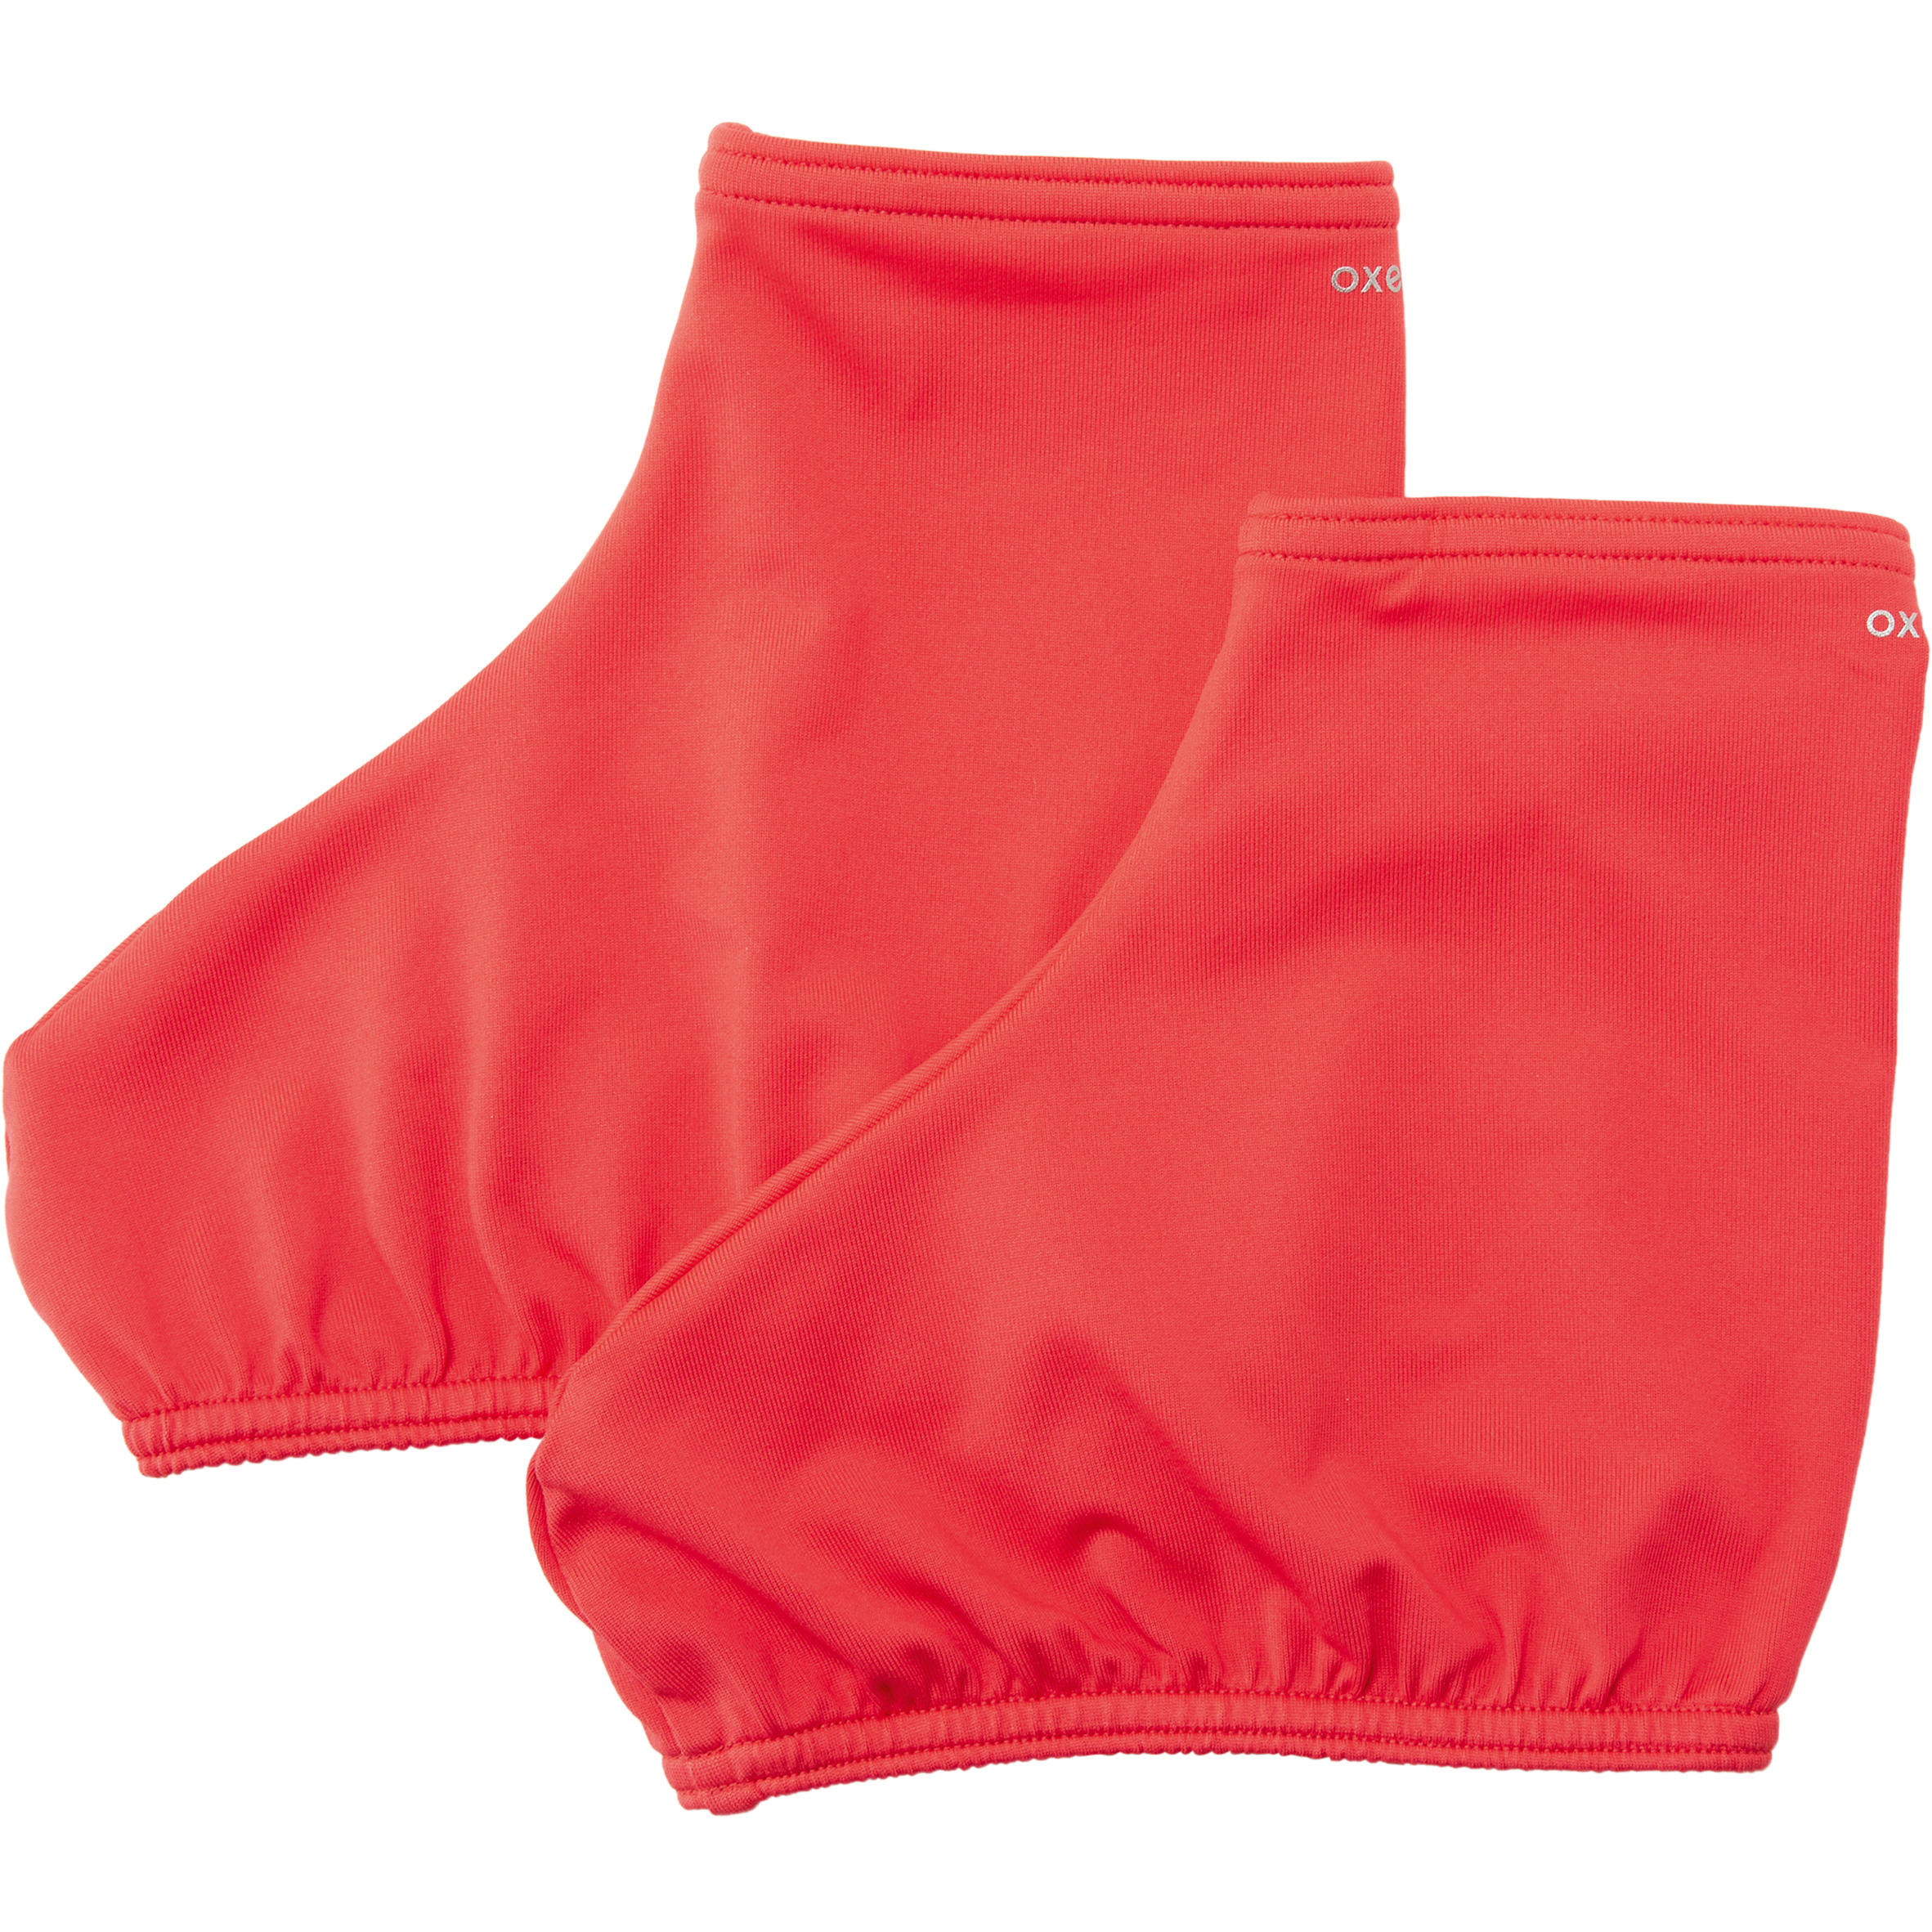 OXELO Figure Skate Covers - Pink/Coral